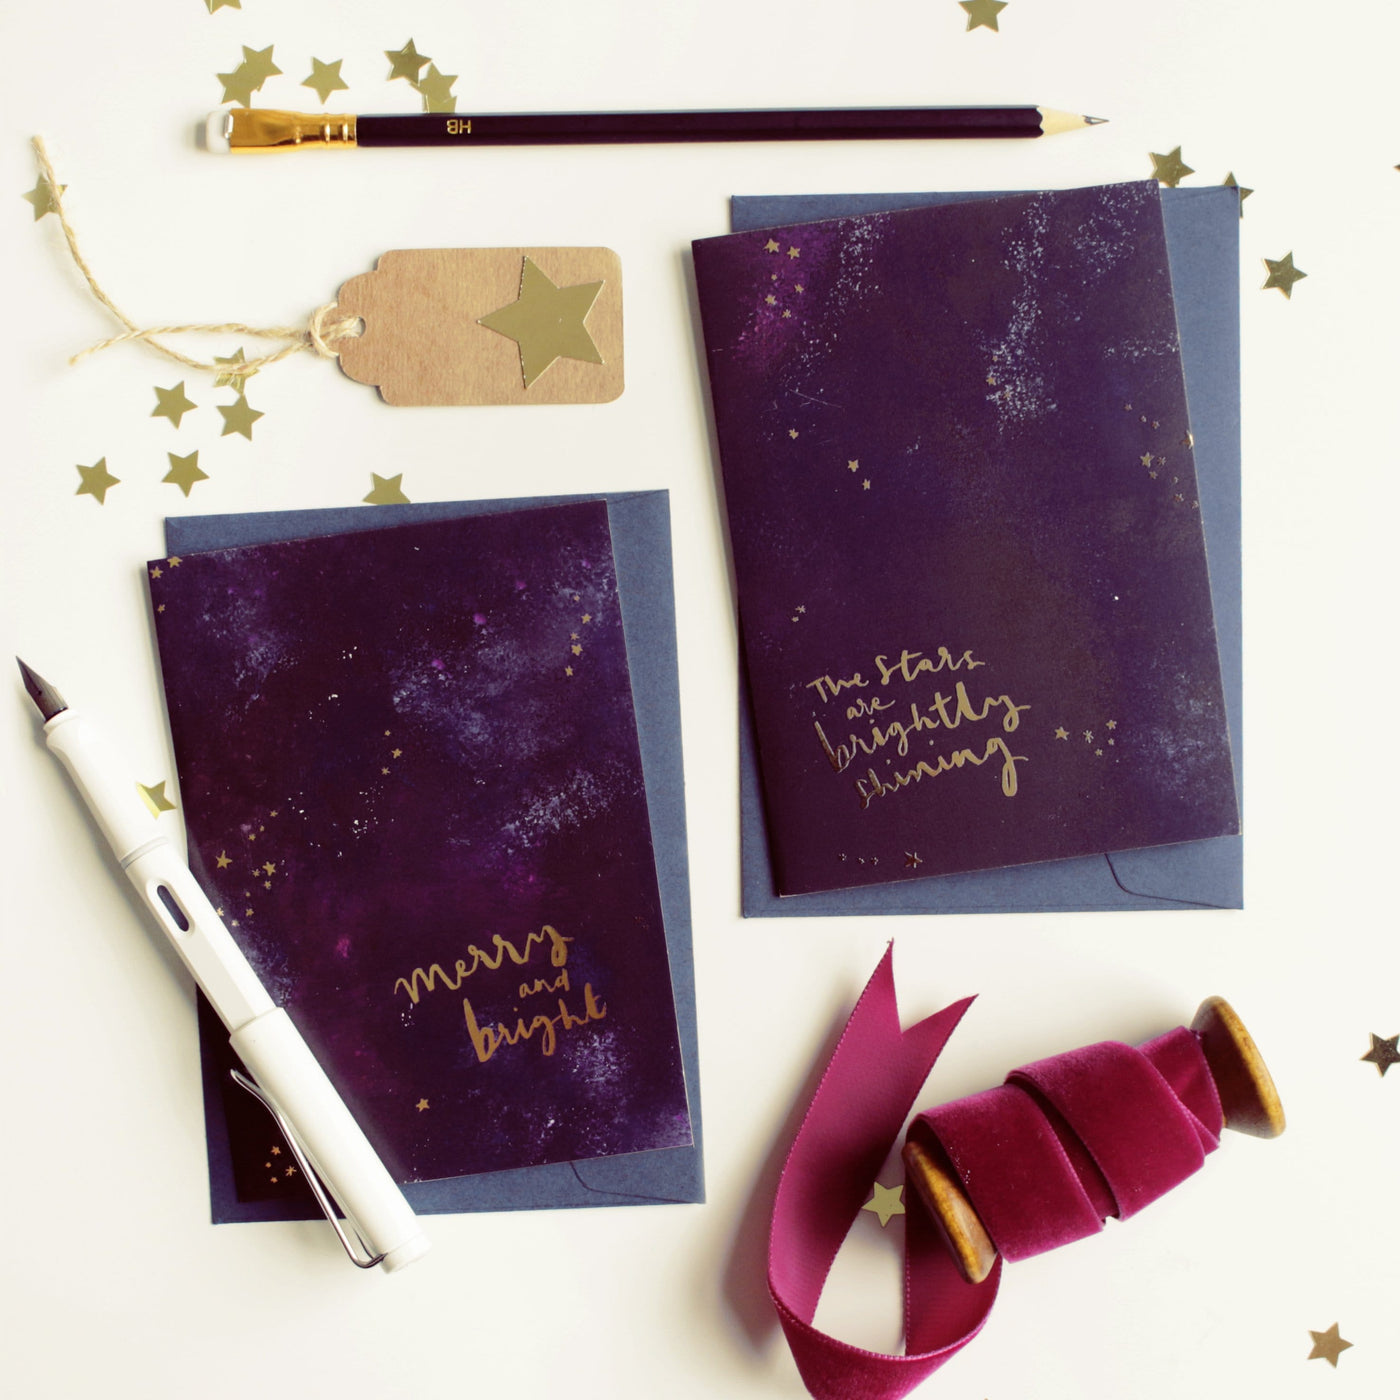 Purple Galaxy Christmas Card With The Words Merry An Bright In Gold With A Deep Navy Envelope With Another Galaxy Christmas Card - Annie Dornan Smith